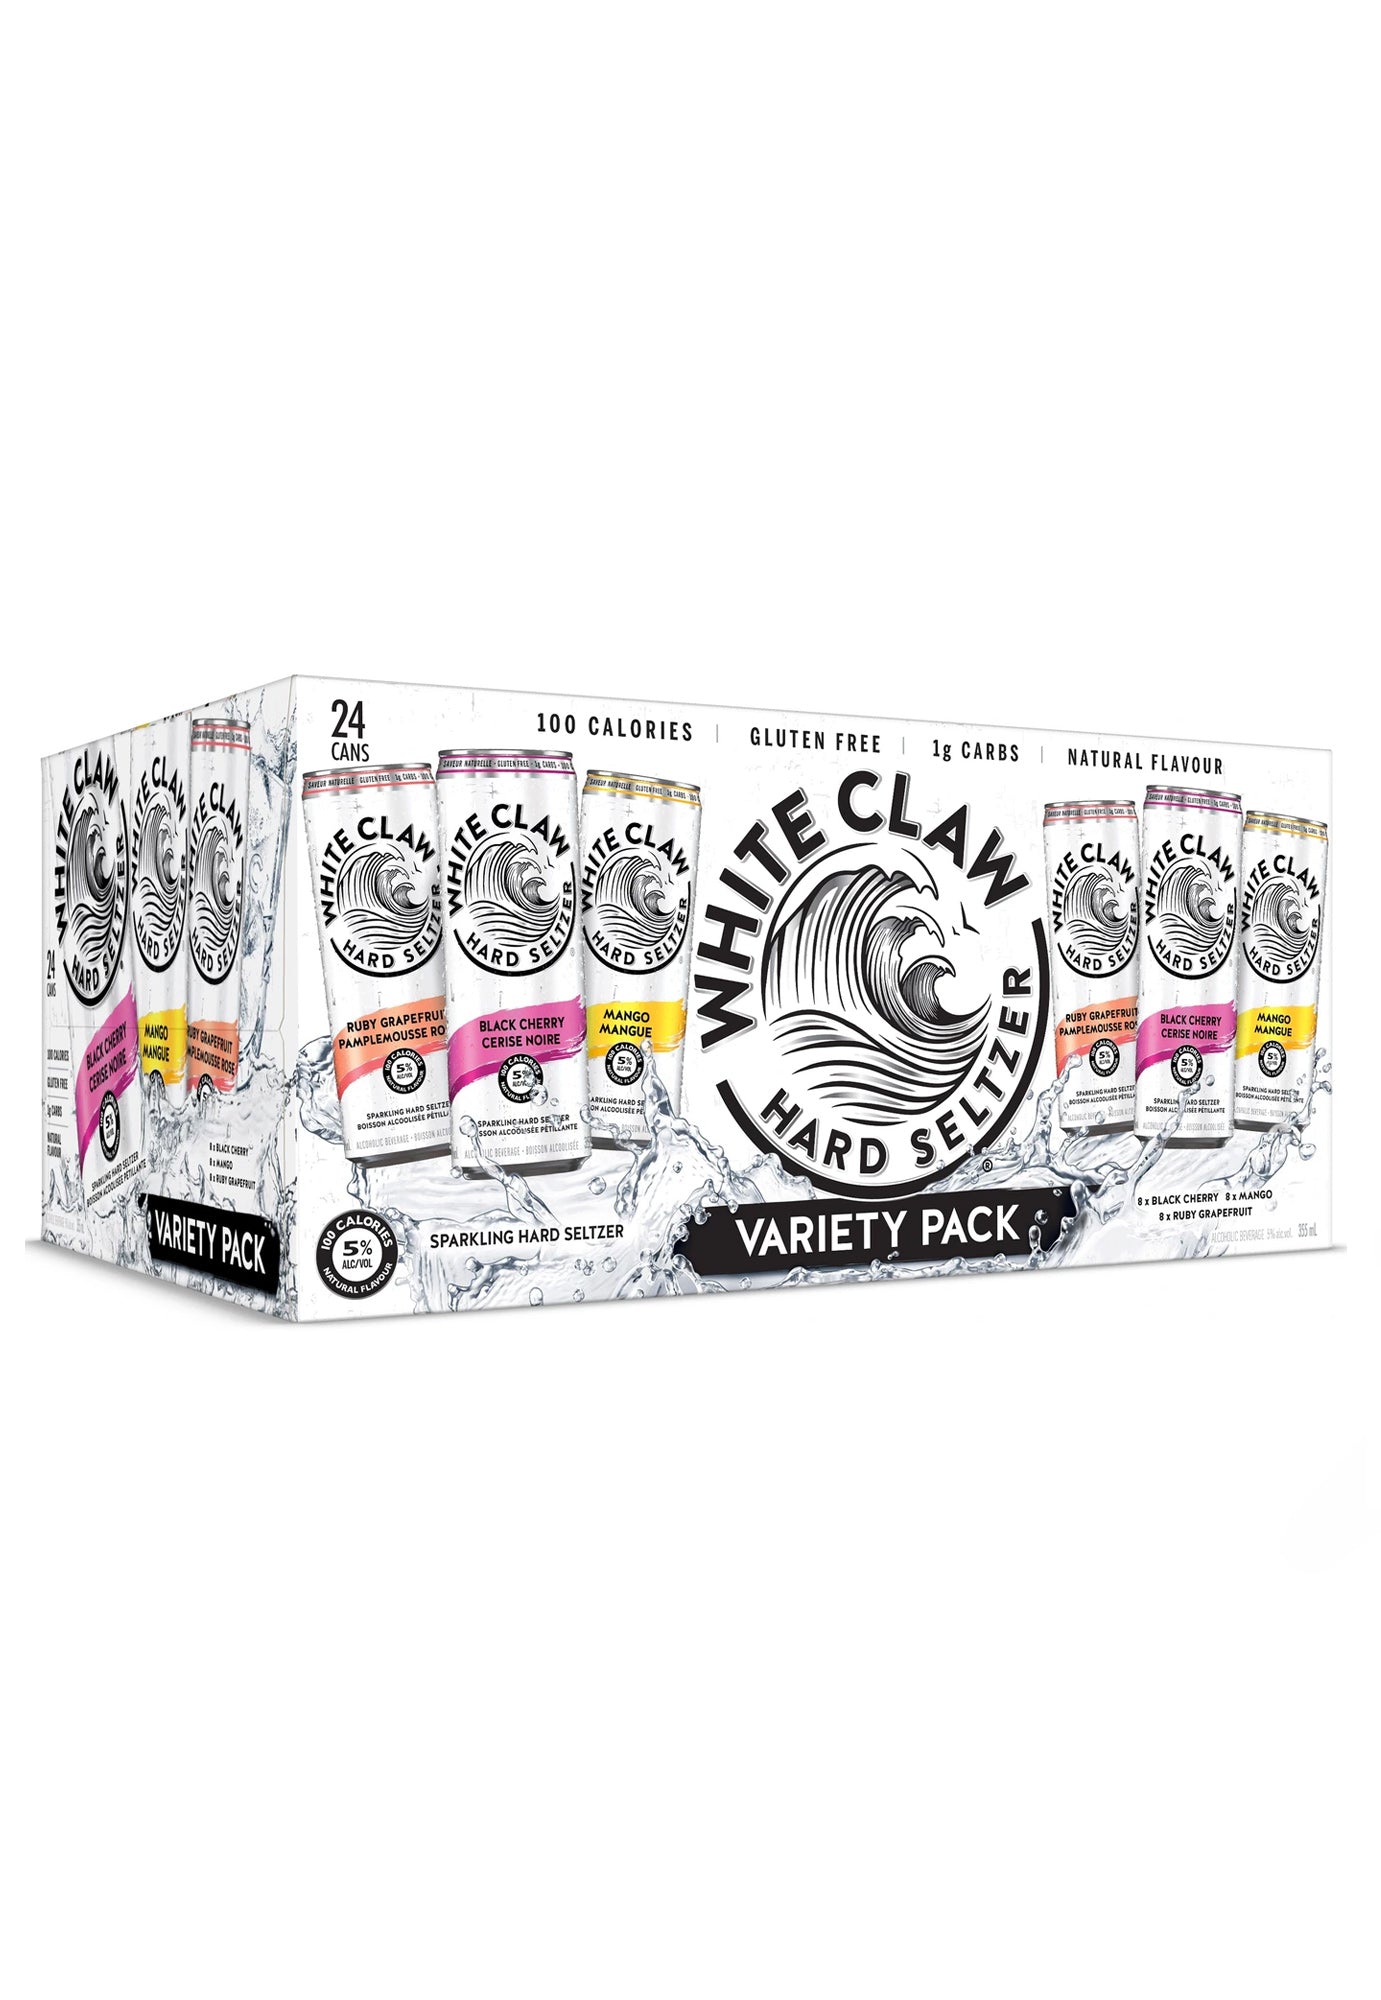 White Claw Variety Pack - 24 Cans